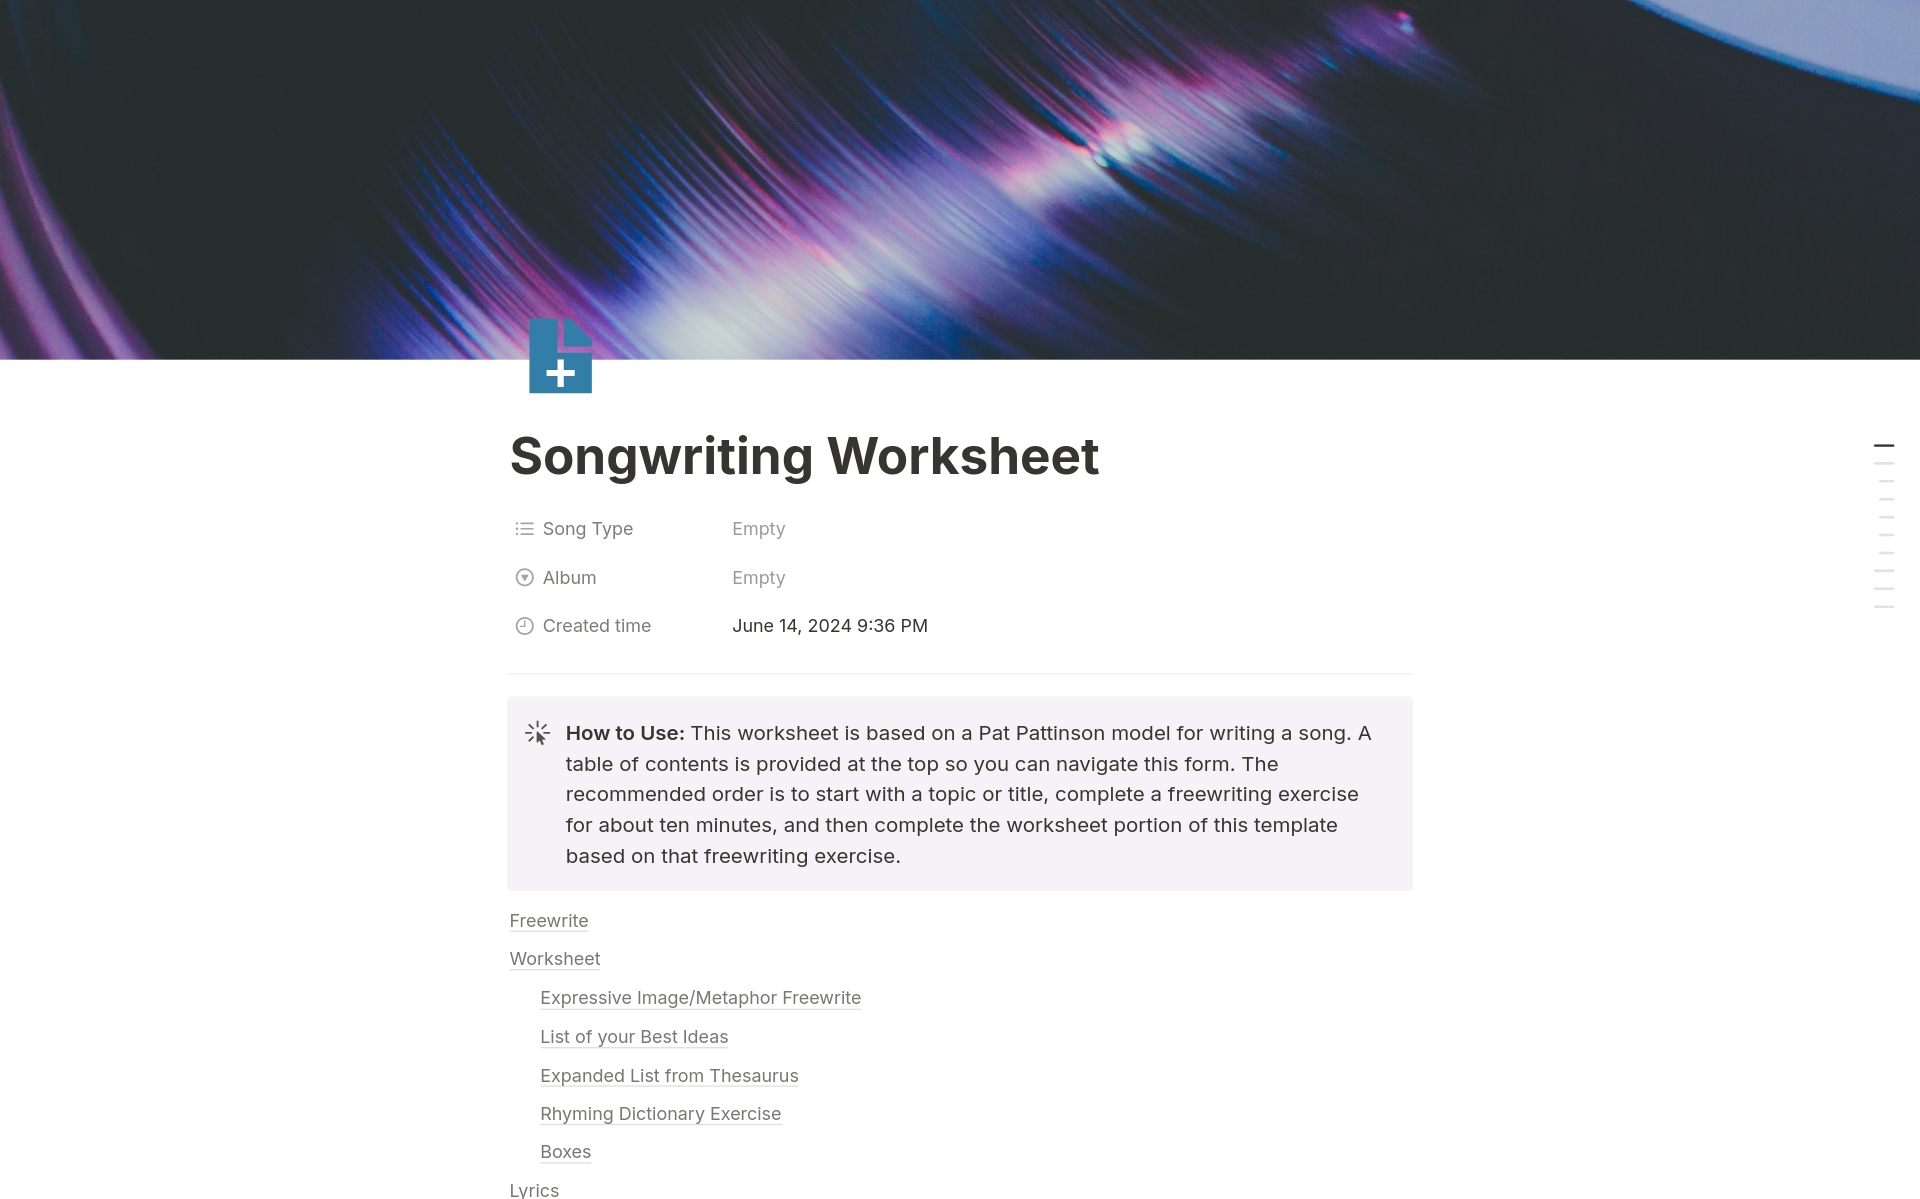 A notes database and songwriting worksheet template loosely based on Pat Pattinson's "Writing Better Lyrics" formula. Provides space for a freewrite, thesaurus, in-line rhyming table, lyrics, and audio. Database can be organized by date, album, or song type.